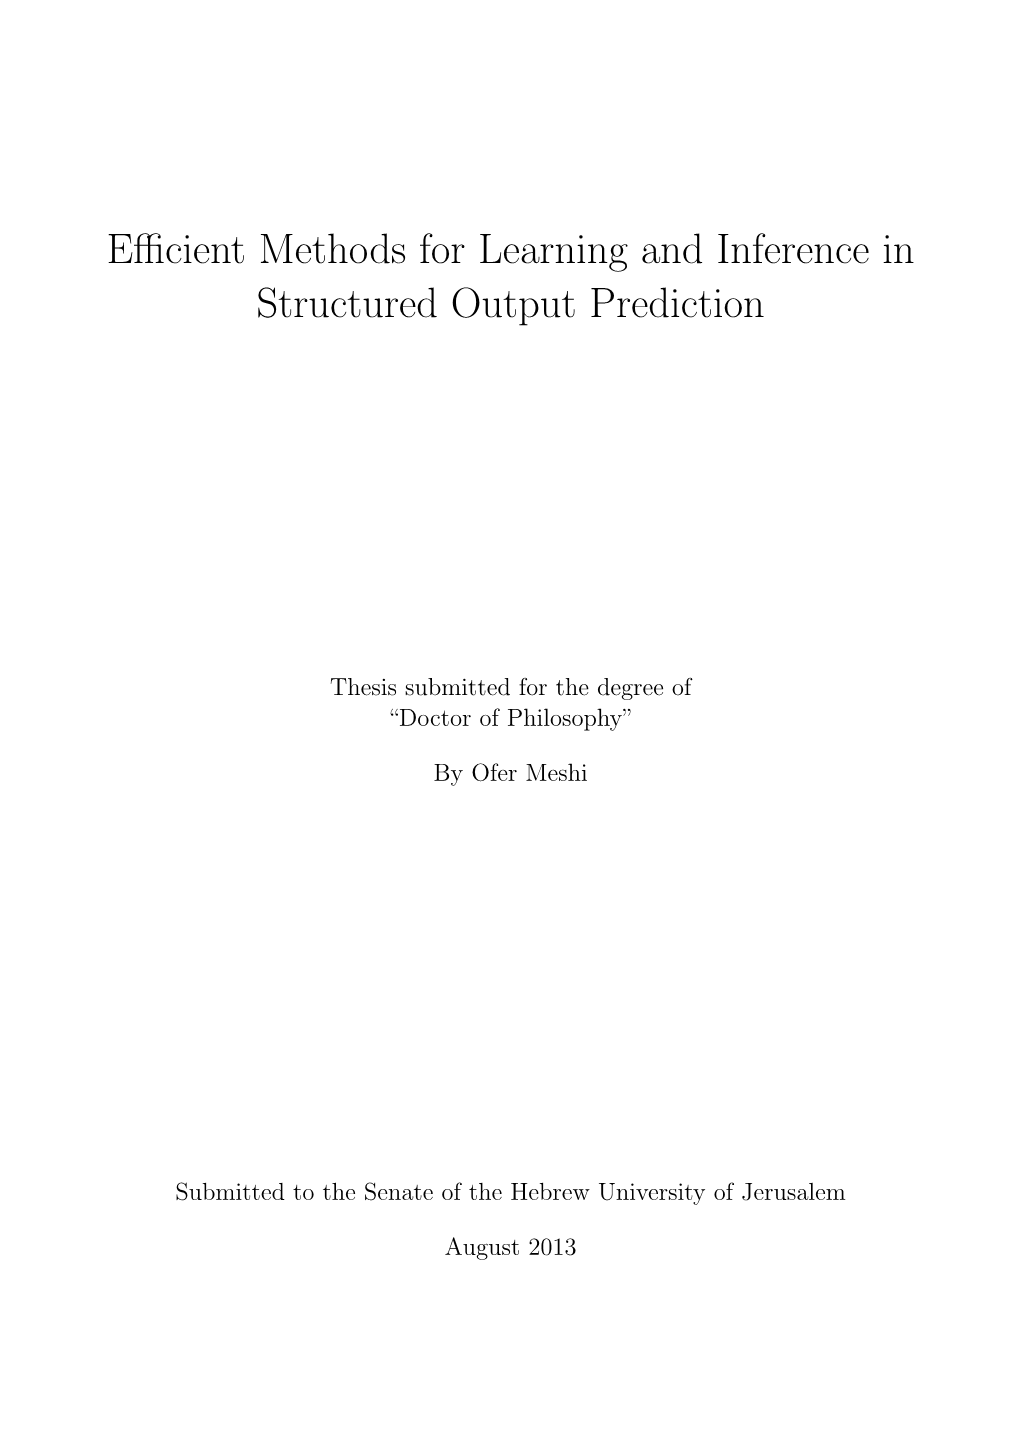 Efficient Methods for Learning and Inference in Structured Output Prediction